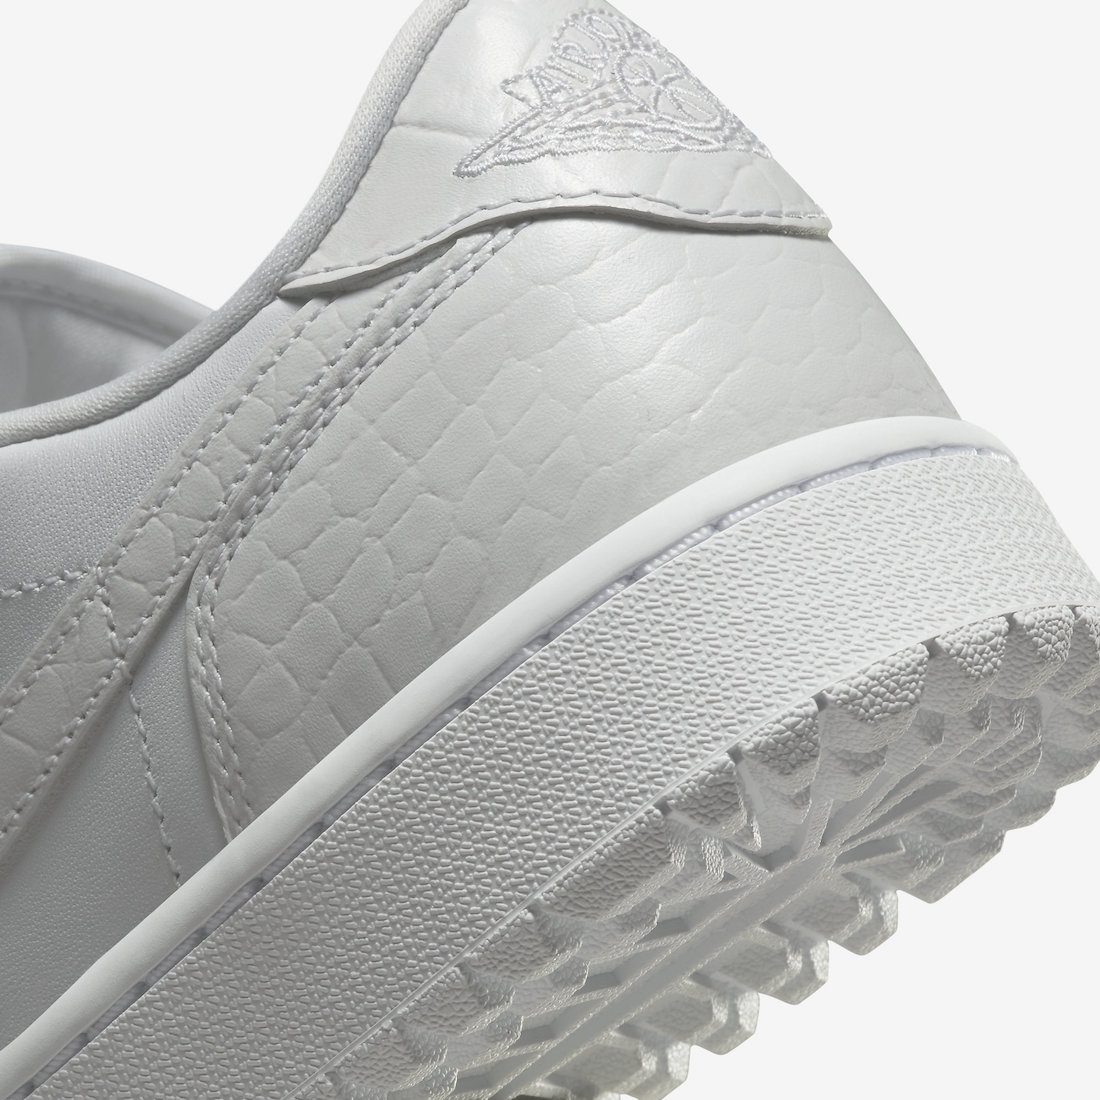 Air Jordan 1 Low Golf White Croc DD9315-110 Release Date + Where to Buy ...